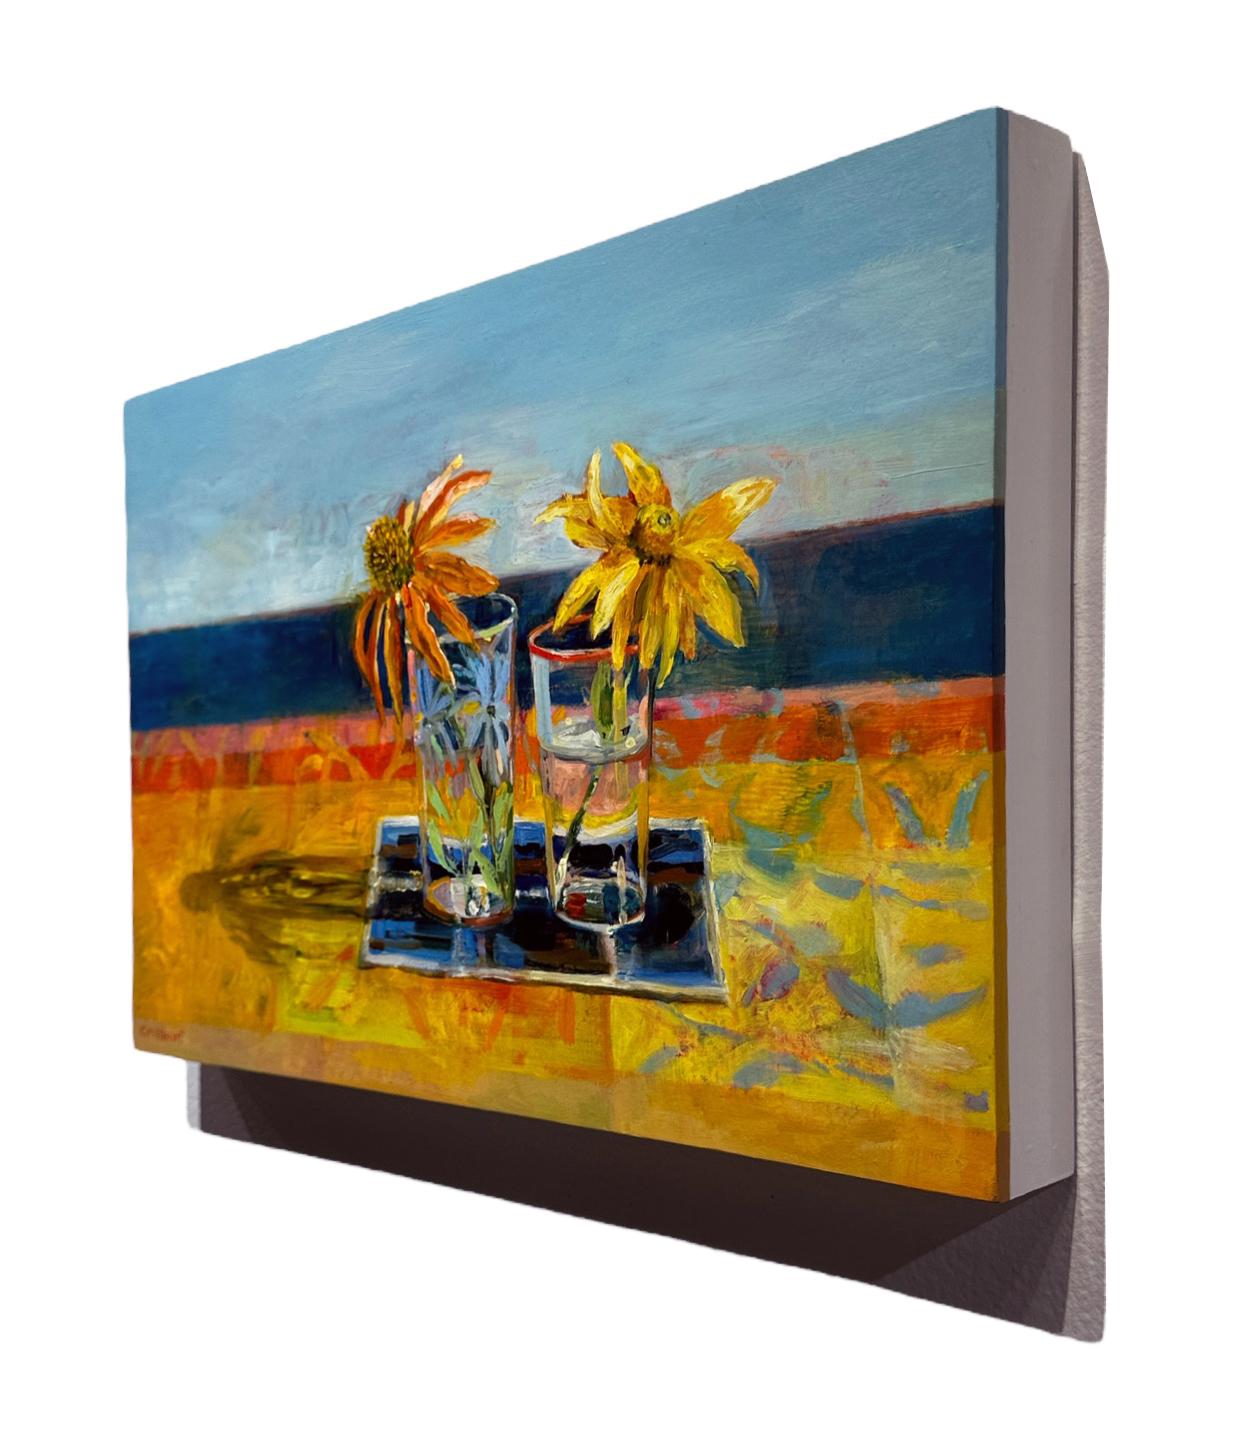 Coneflower, Rudbeckia - Colorful Floral Still Life Oil on Panel Painting For Sale 2